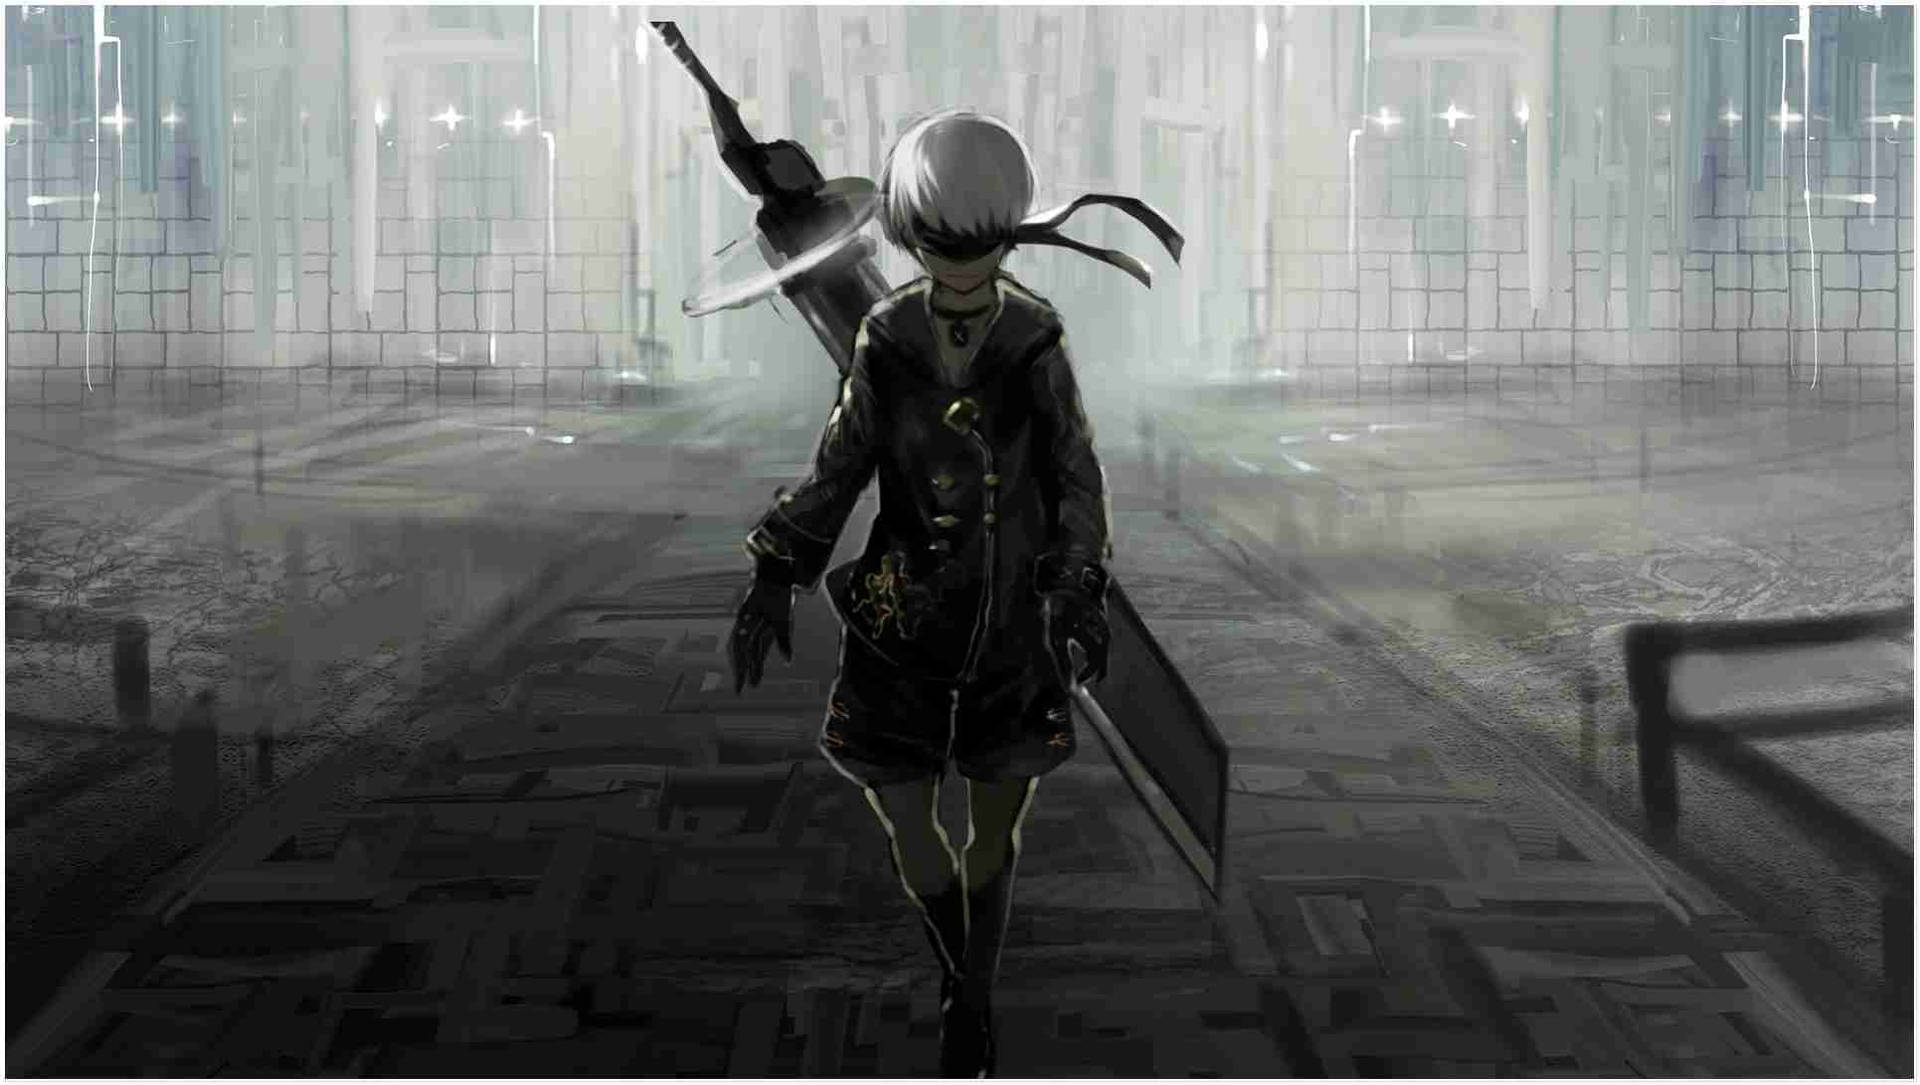 Play as 9S in NieR Automata and explore a post-apocalyptic world Wallpaper